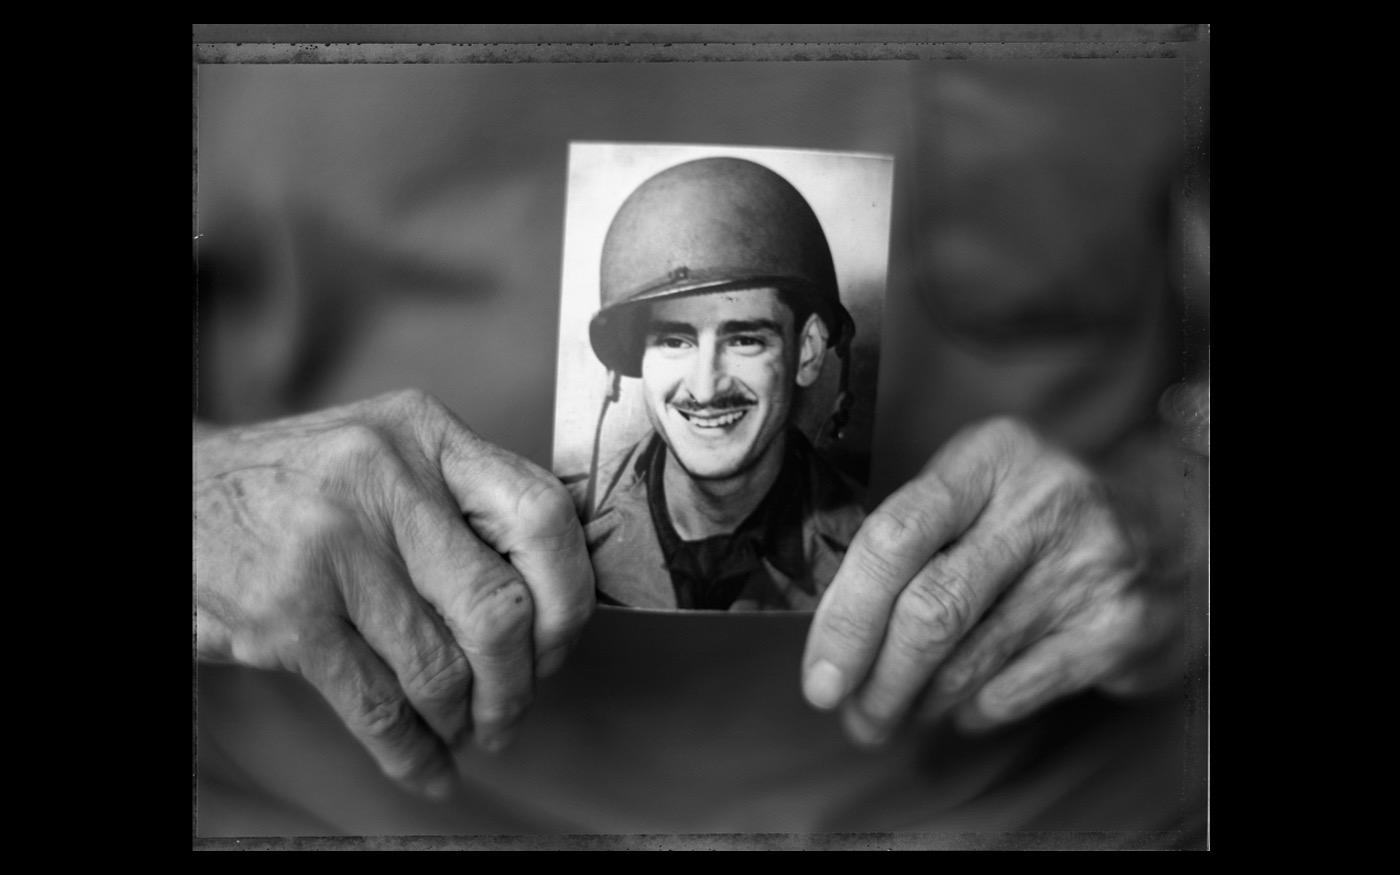 Former soldier Harry Parley holds a picture of himself as a young soldier  2004 : Looking Back: 60 Years of Photographs : David Burnett | Photographer